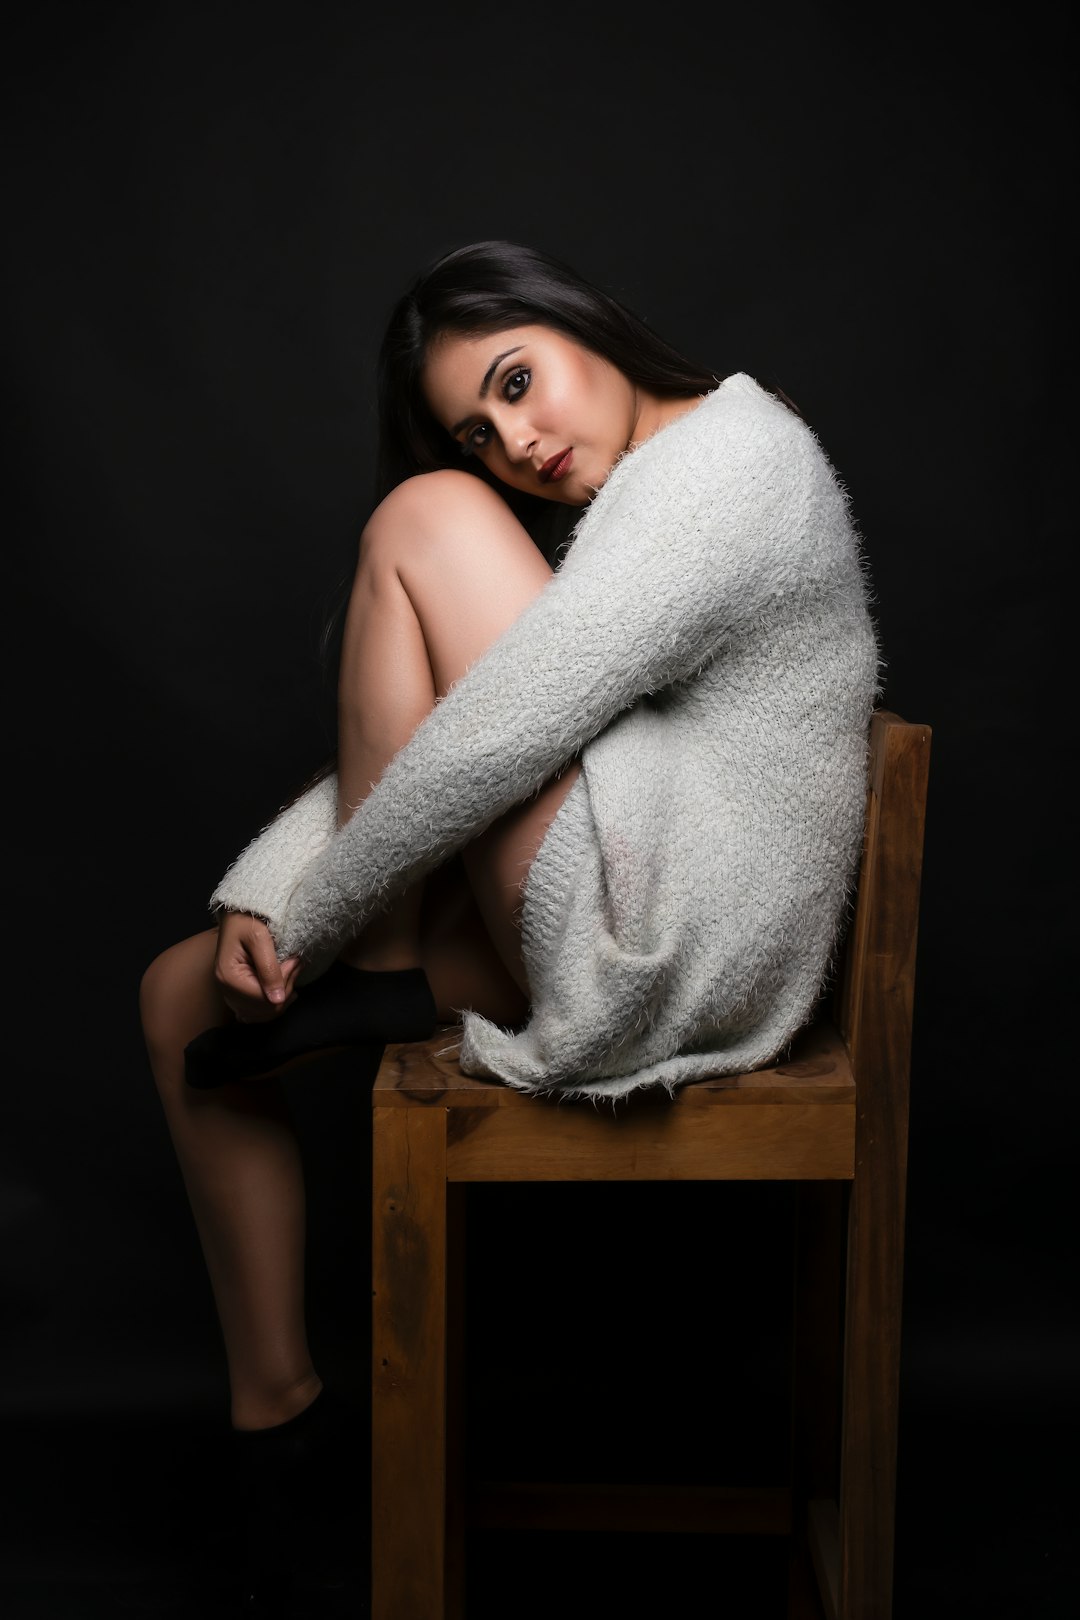 woman in white bath towel sitting on brown wooden chair